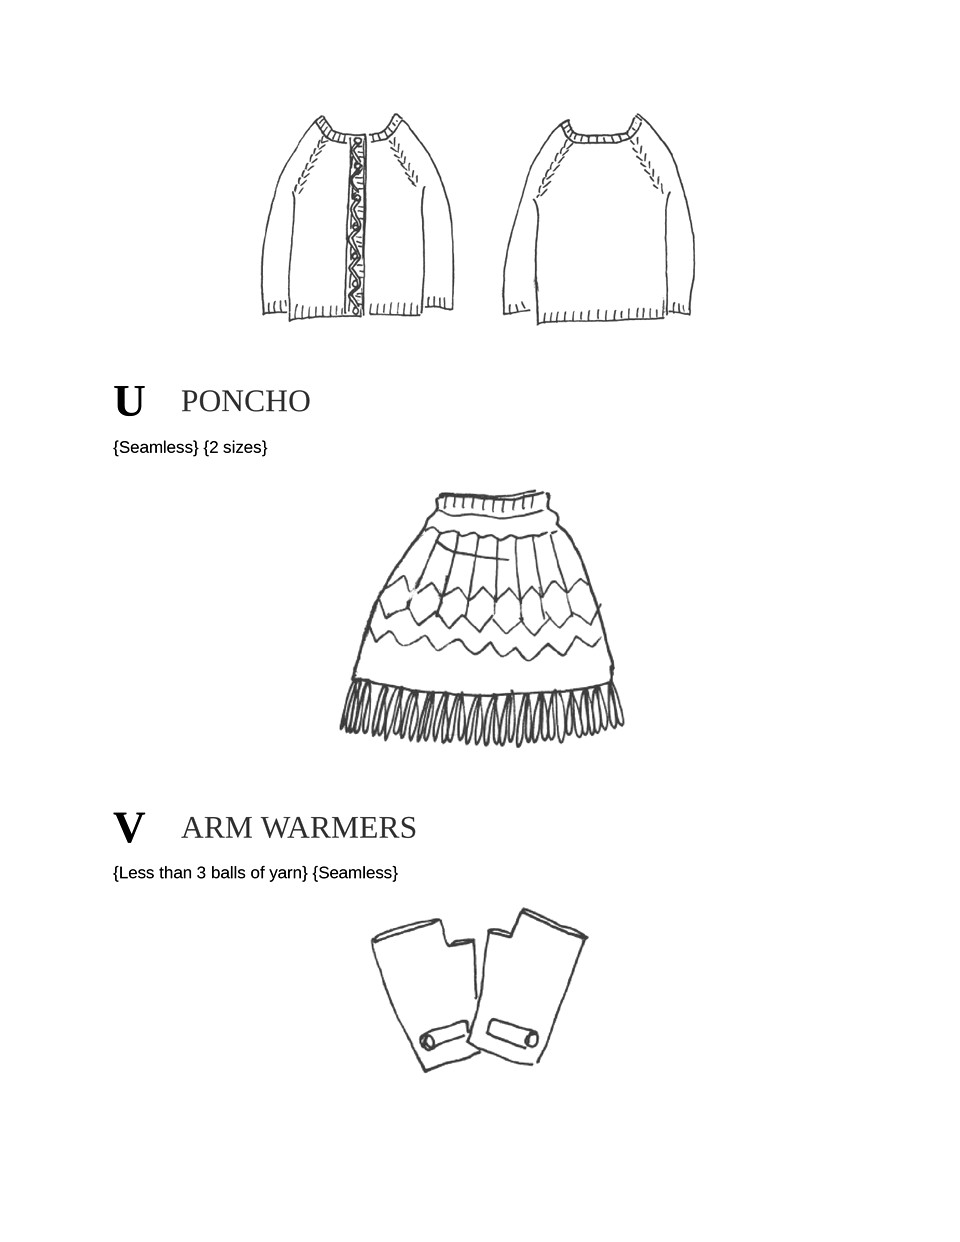 Japanese Knitting Patterns for Sweaters Scarves and More-13